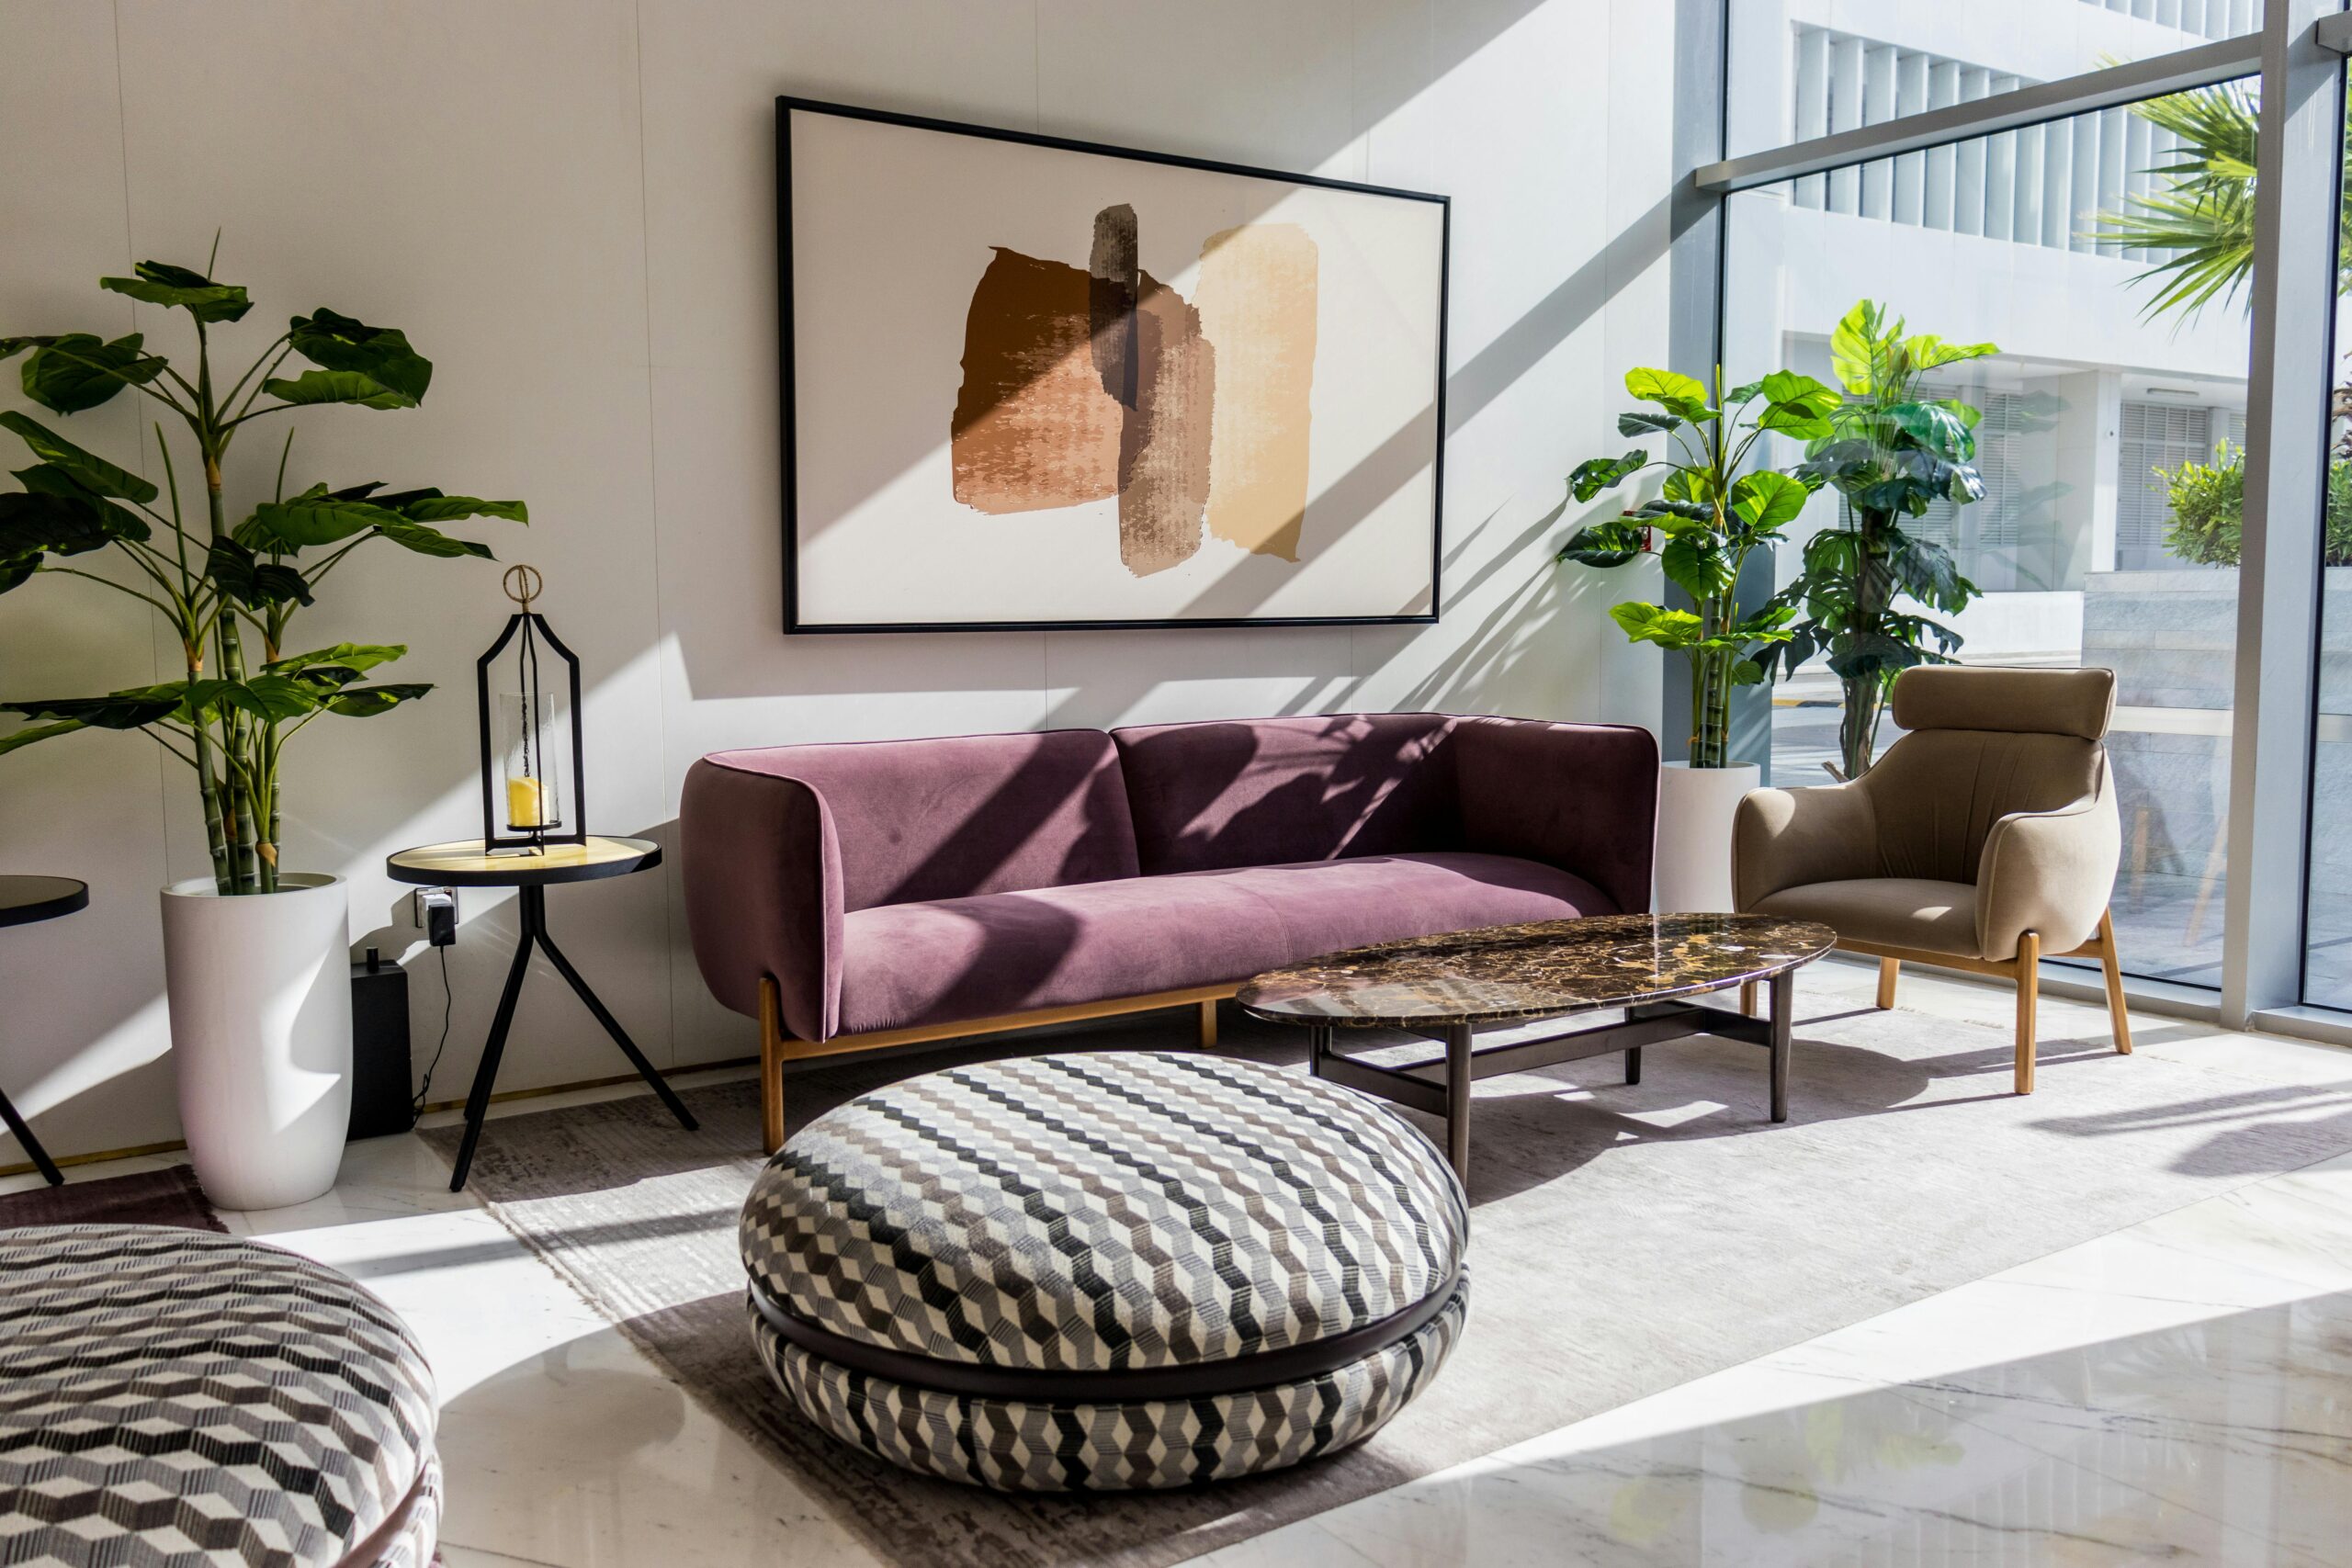 Sunlit living room with modern furnishings, purple couch and plants